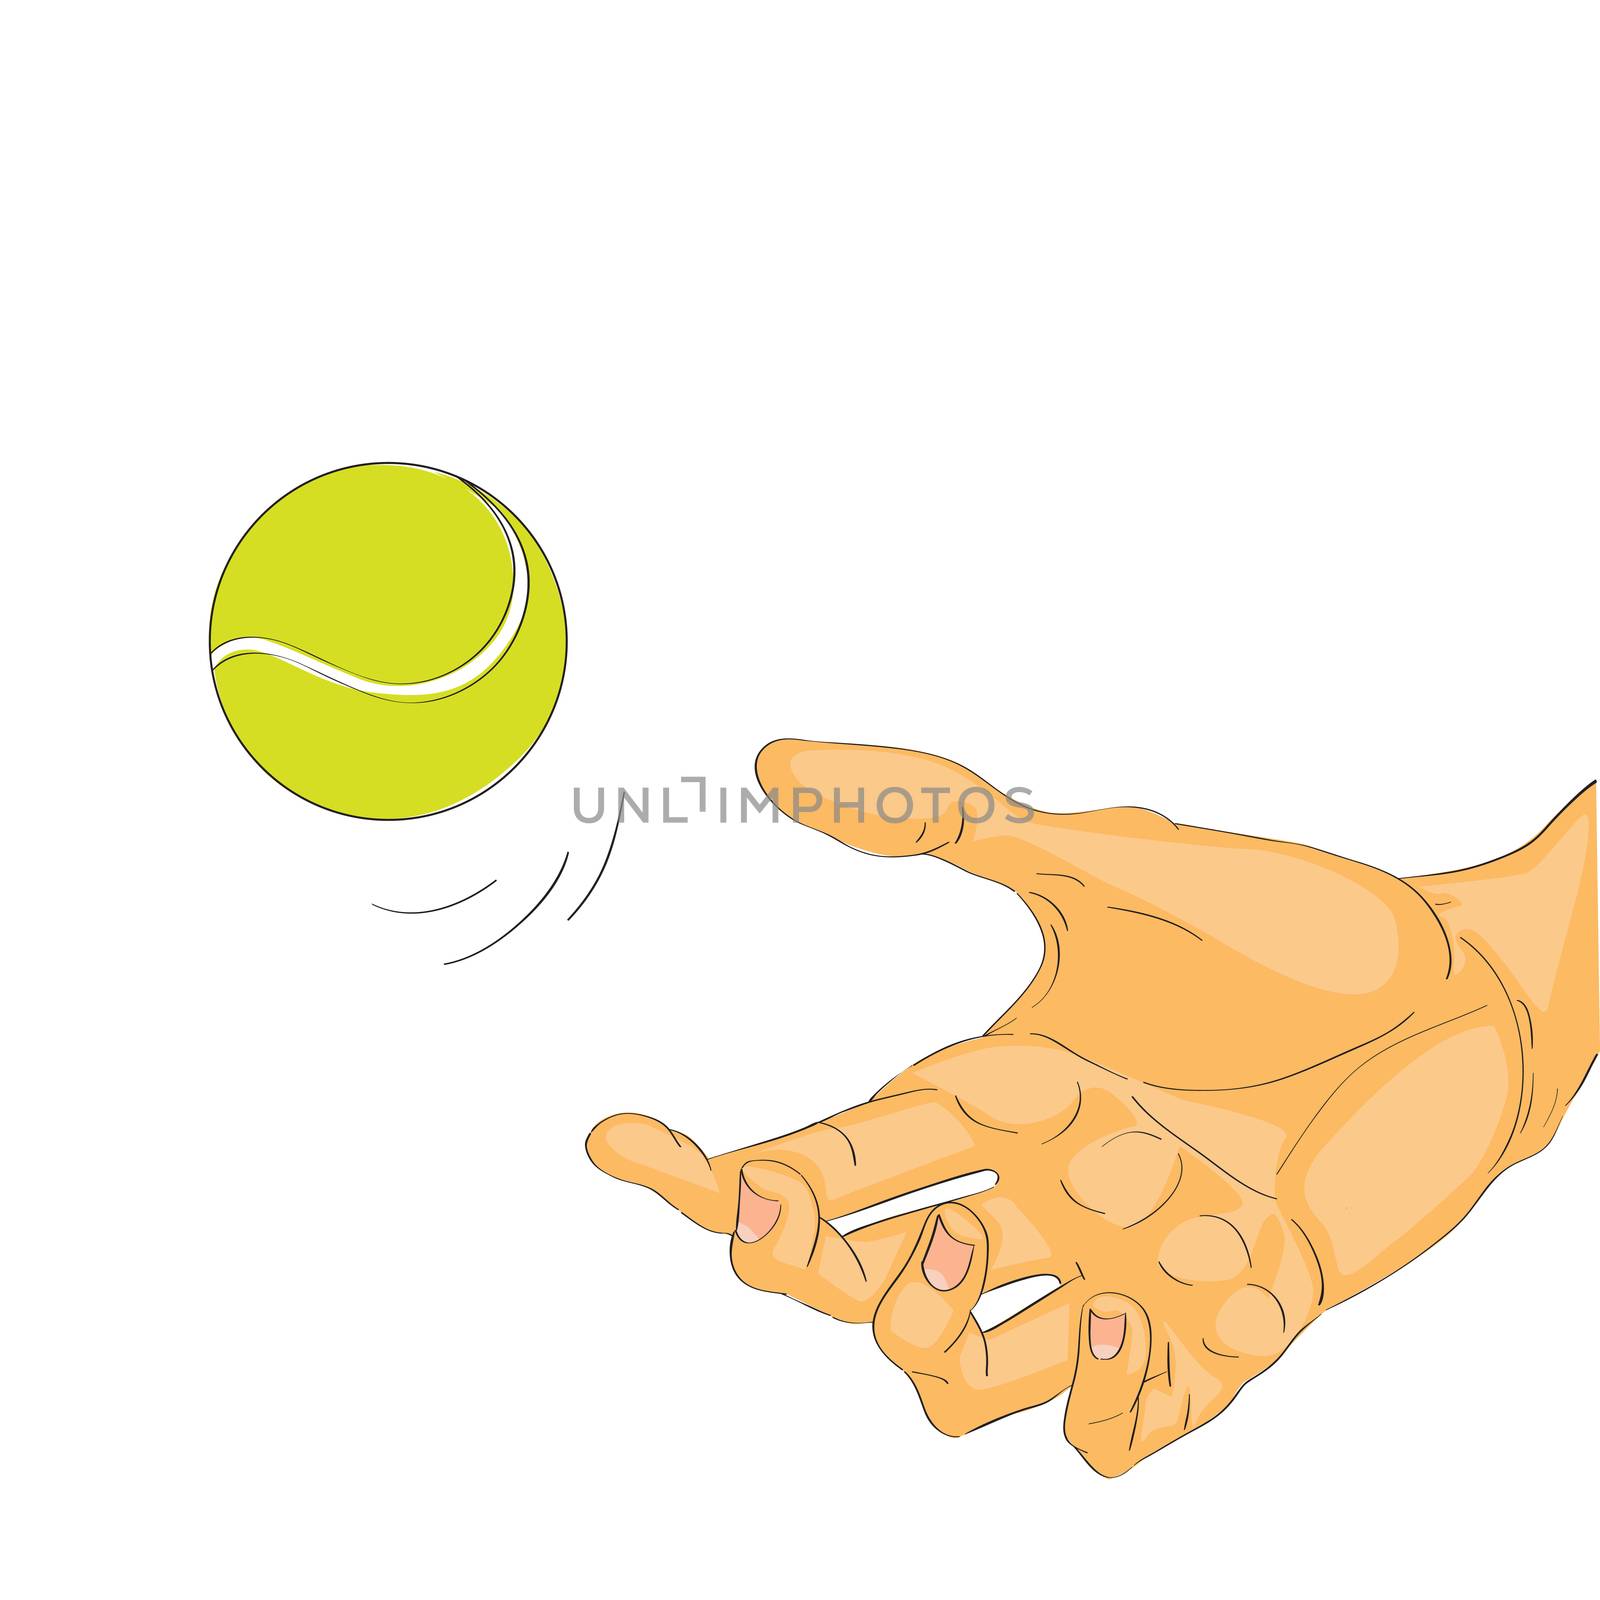 Cartoon illustration of a hand catching or throwing a tennis ball over a white background